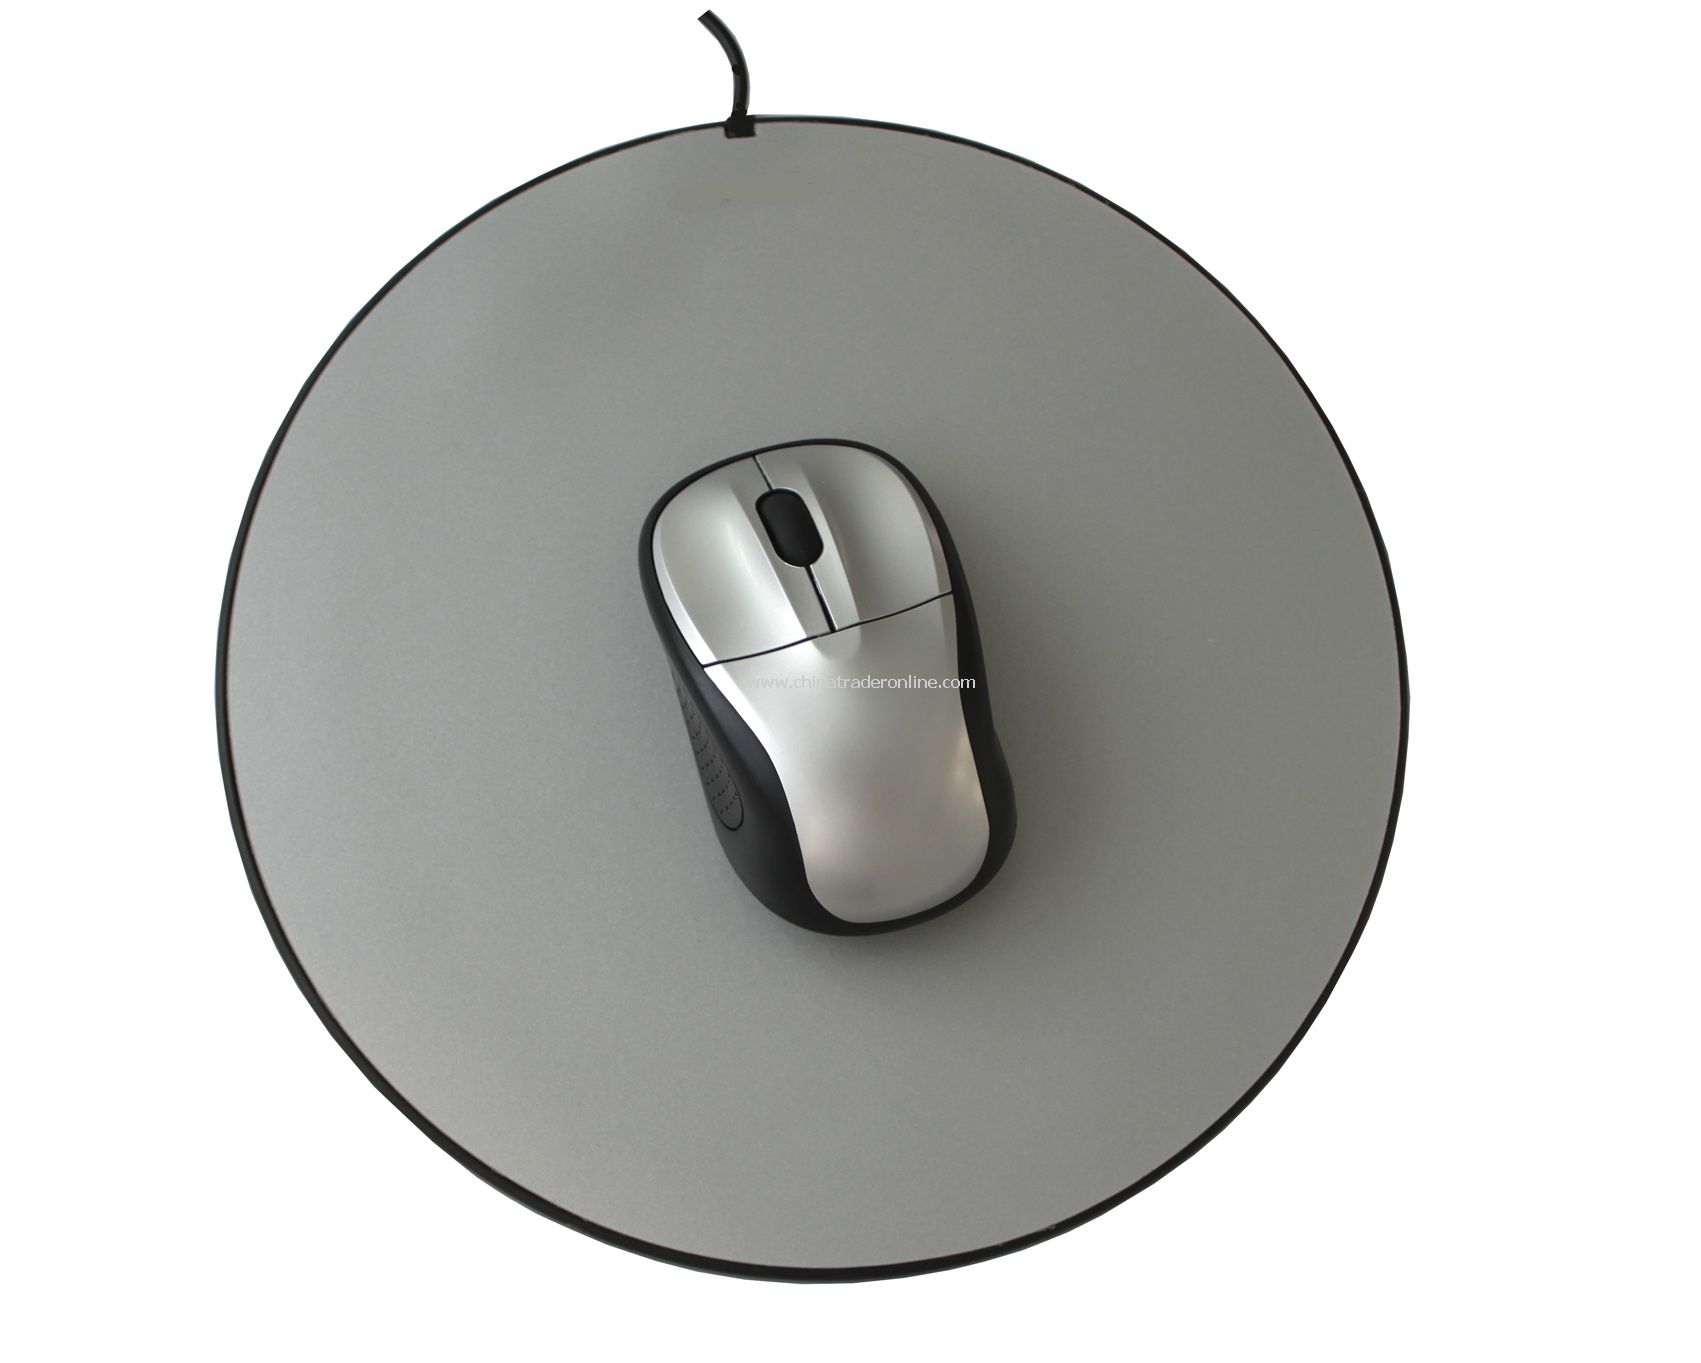 Battery Free Wireless Mouse